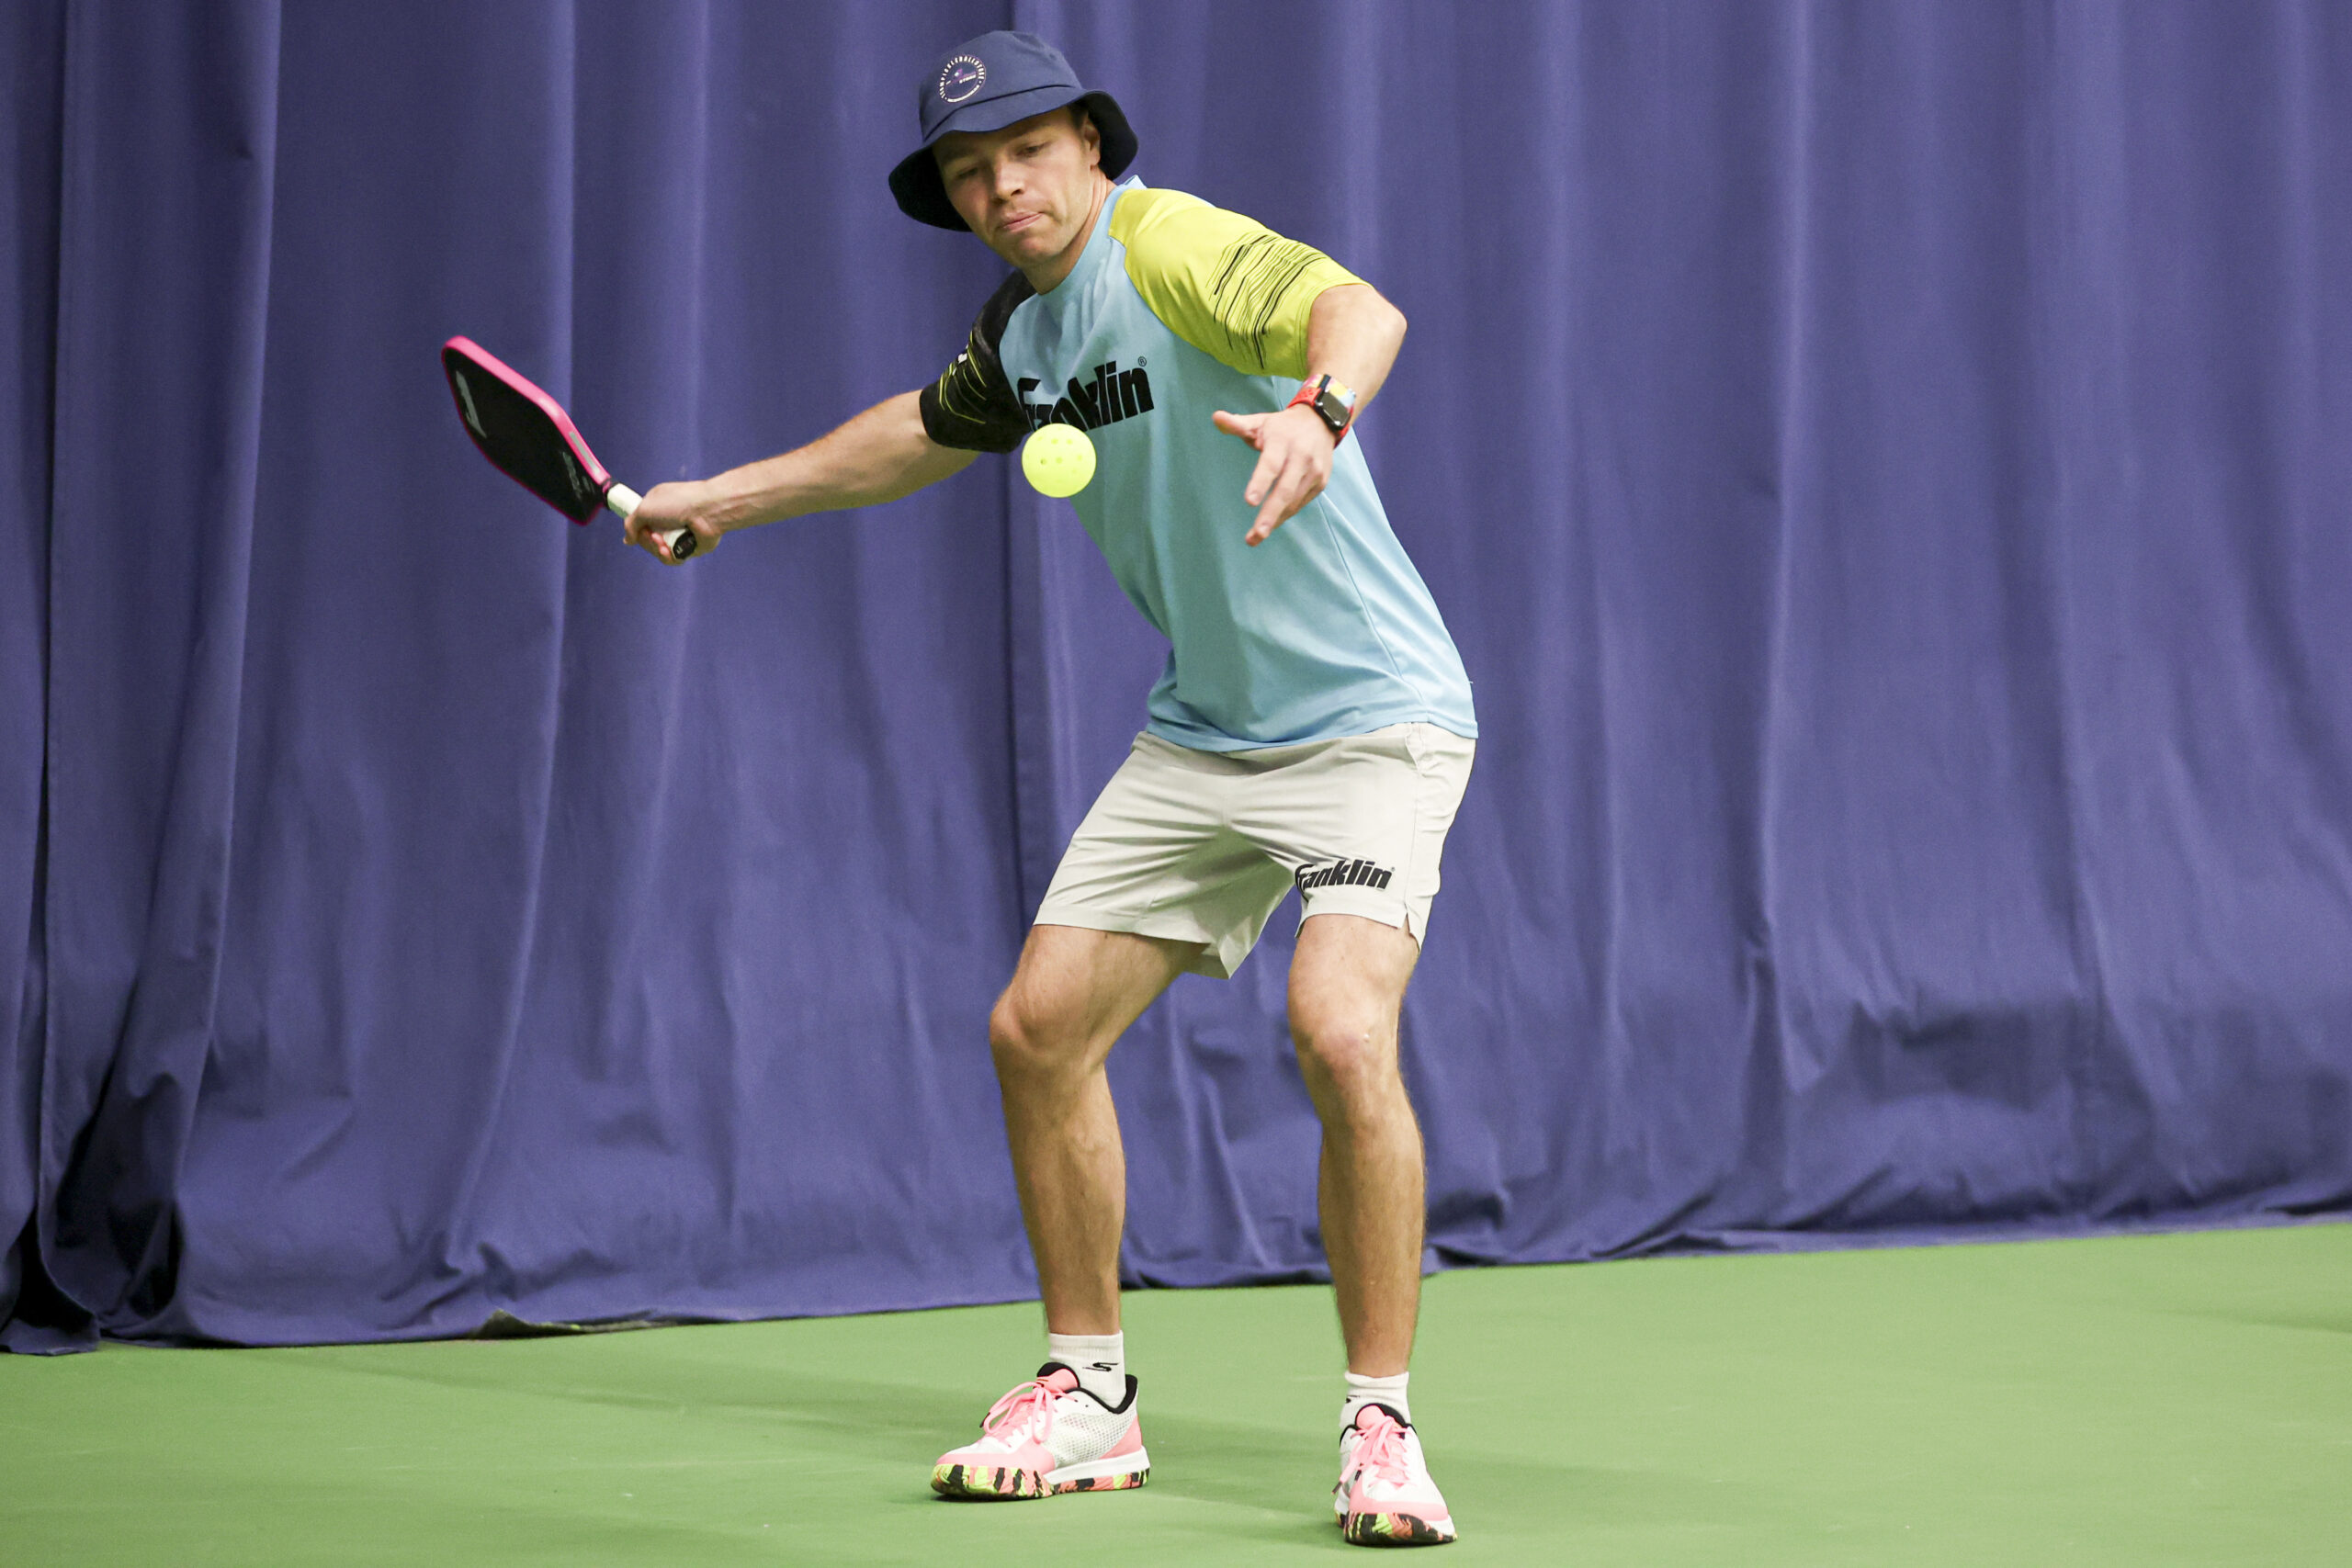 Louis Laville hails rising standards at English Open Pickleball 52